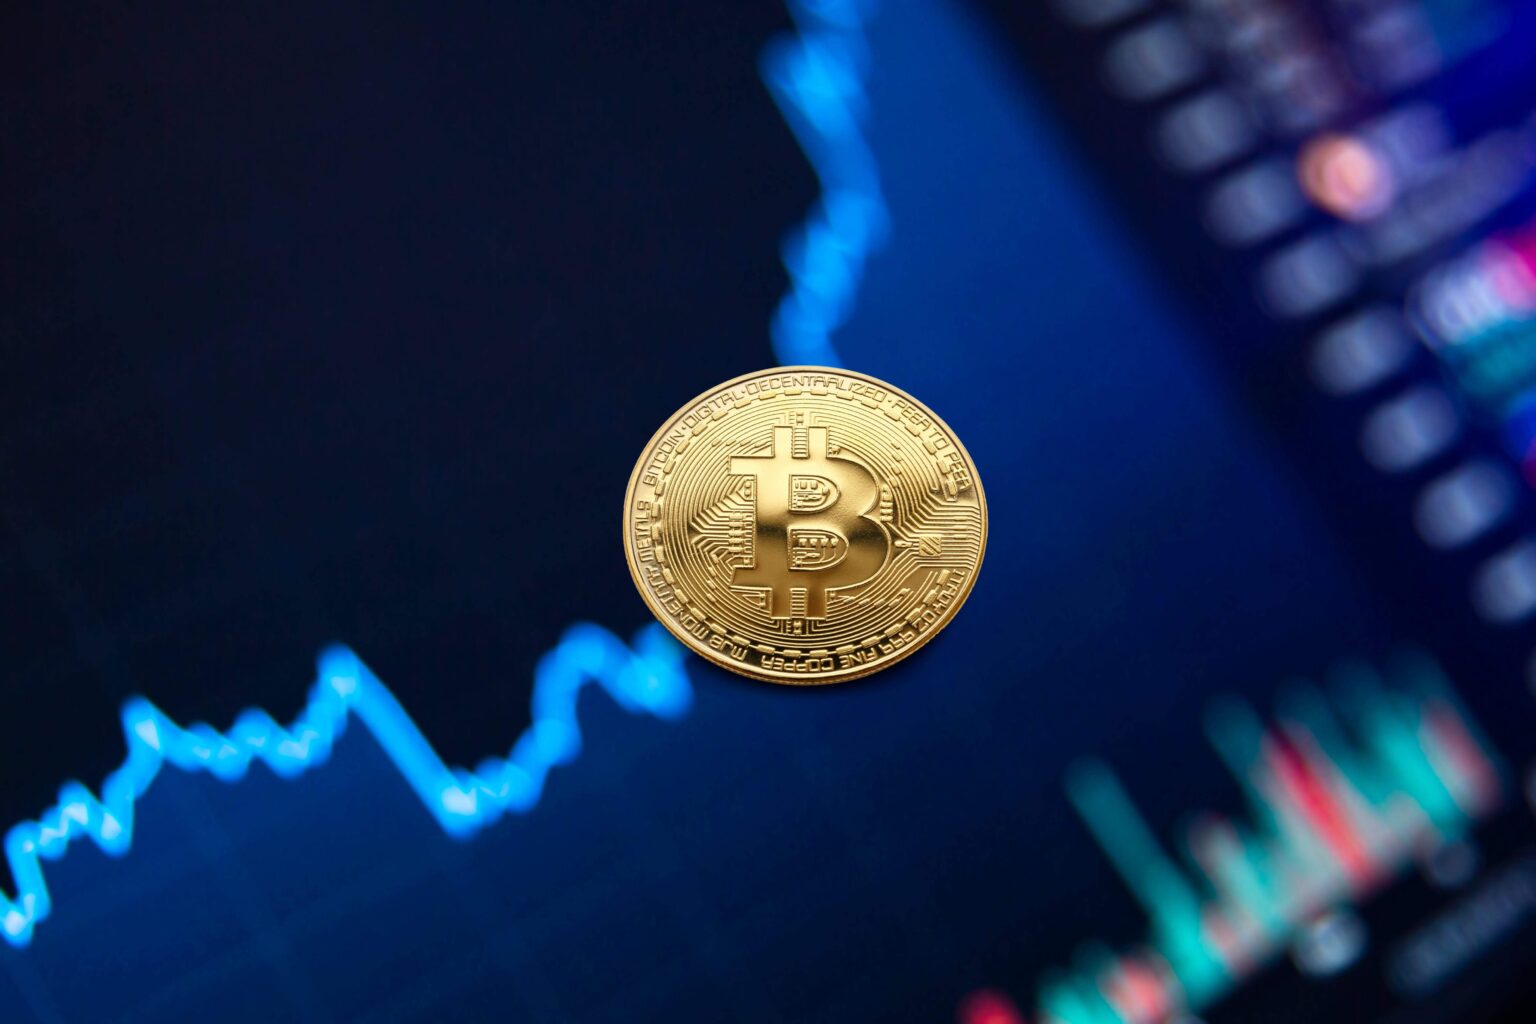 Crypto funds record 7th consecutive week of capital inflows